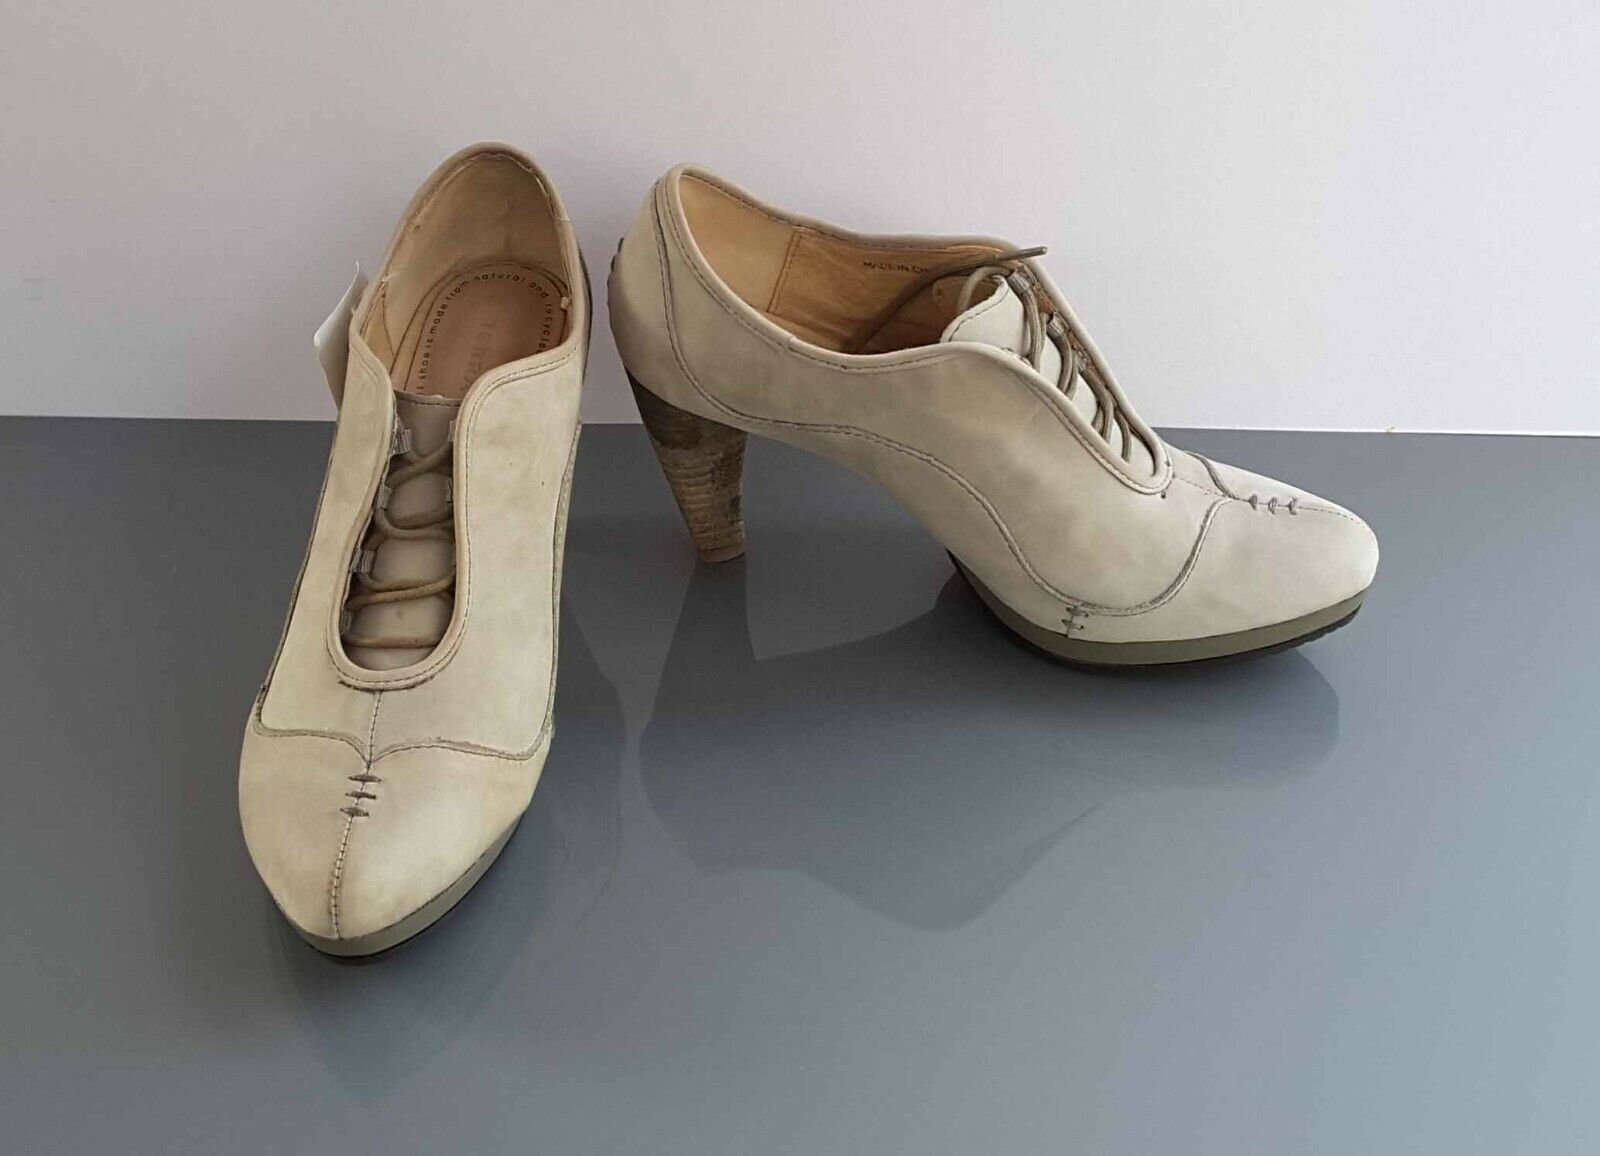 Terra Plana Taupe Court Shoes New EUR 38 UK Size 5 1/2 | eBay